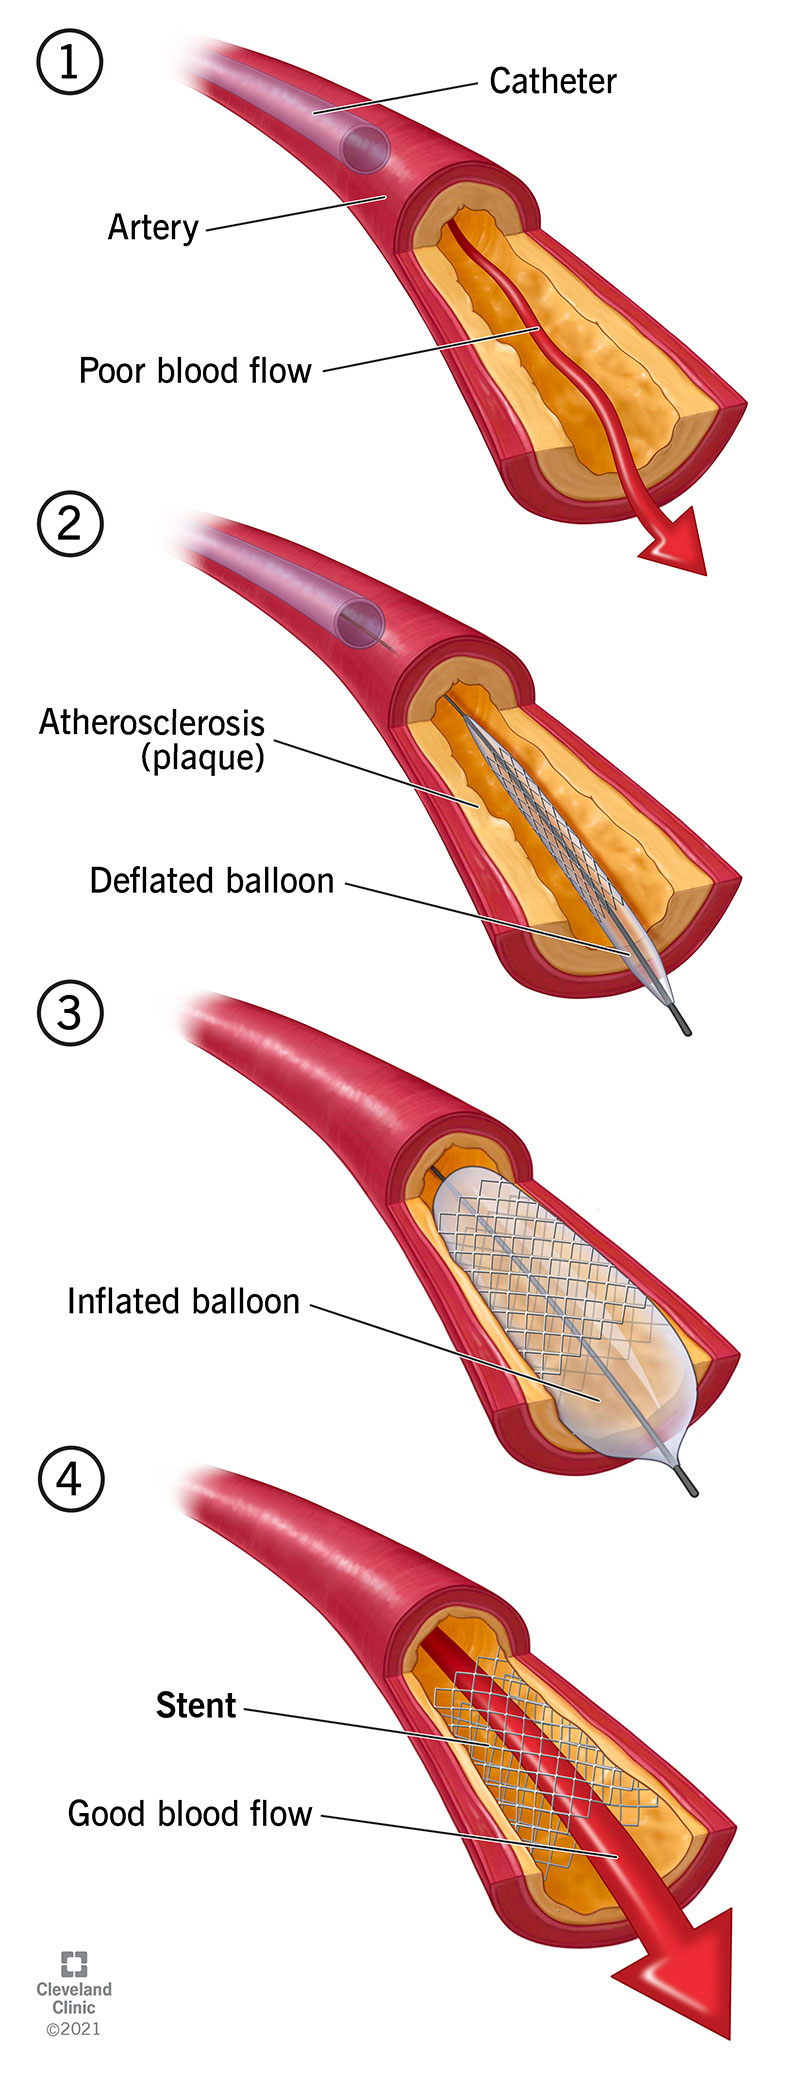 A stent is a very small tube your healthcare provider can put inside your artery to keep it open.